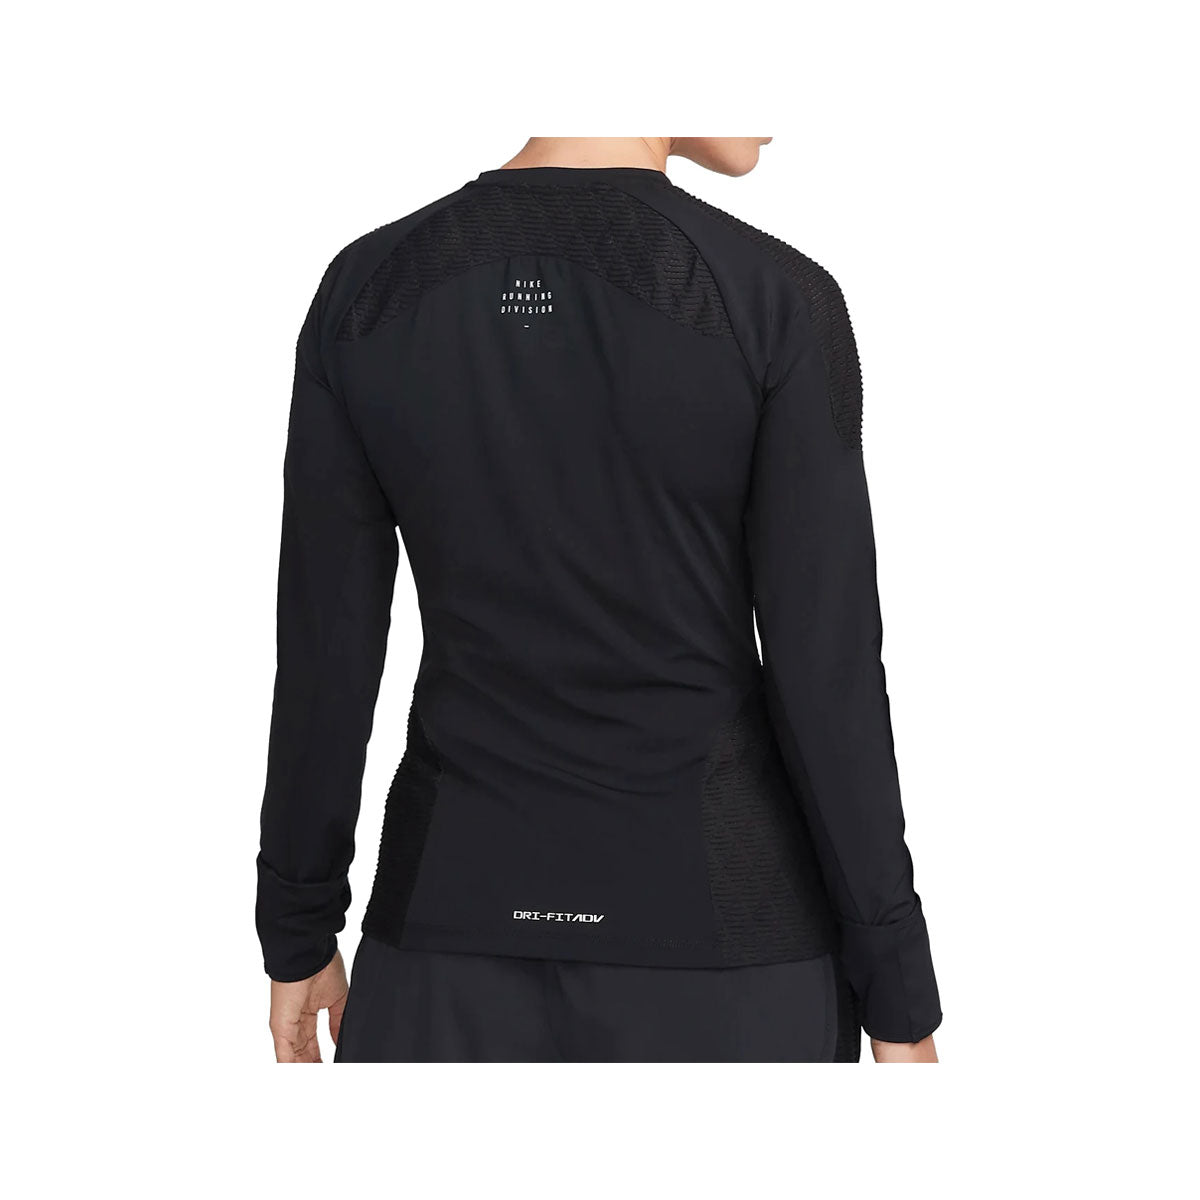 Nike Women's Dri-FIT Division Long Sleeve Top